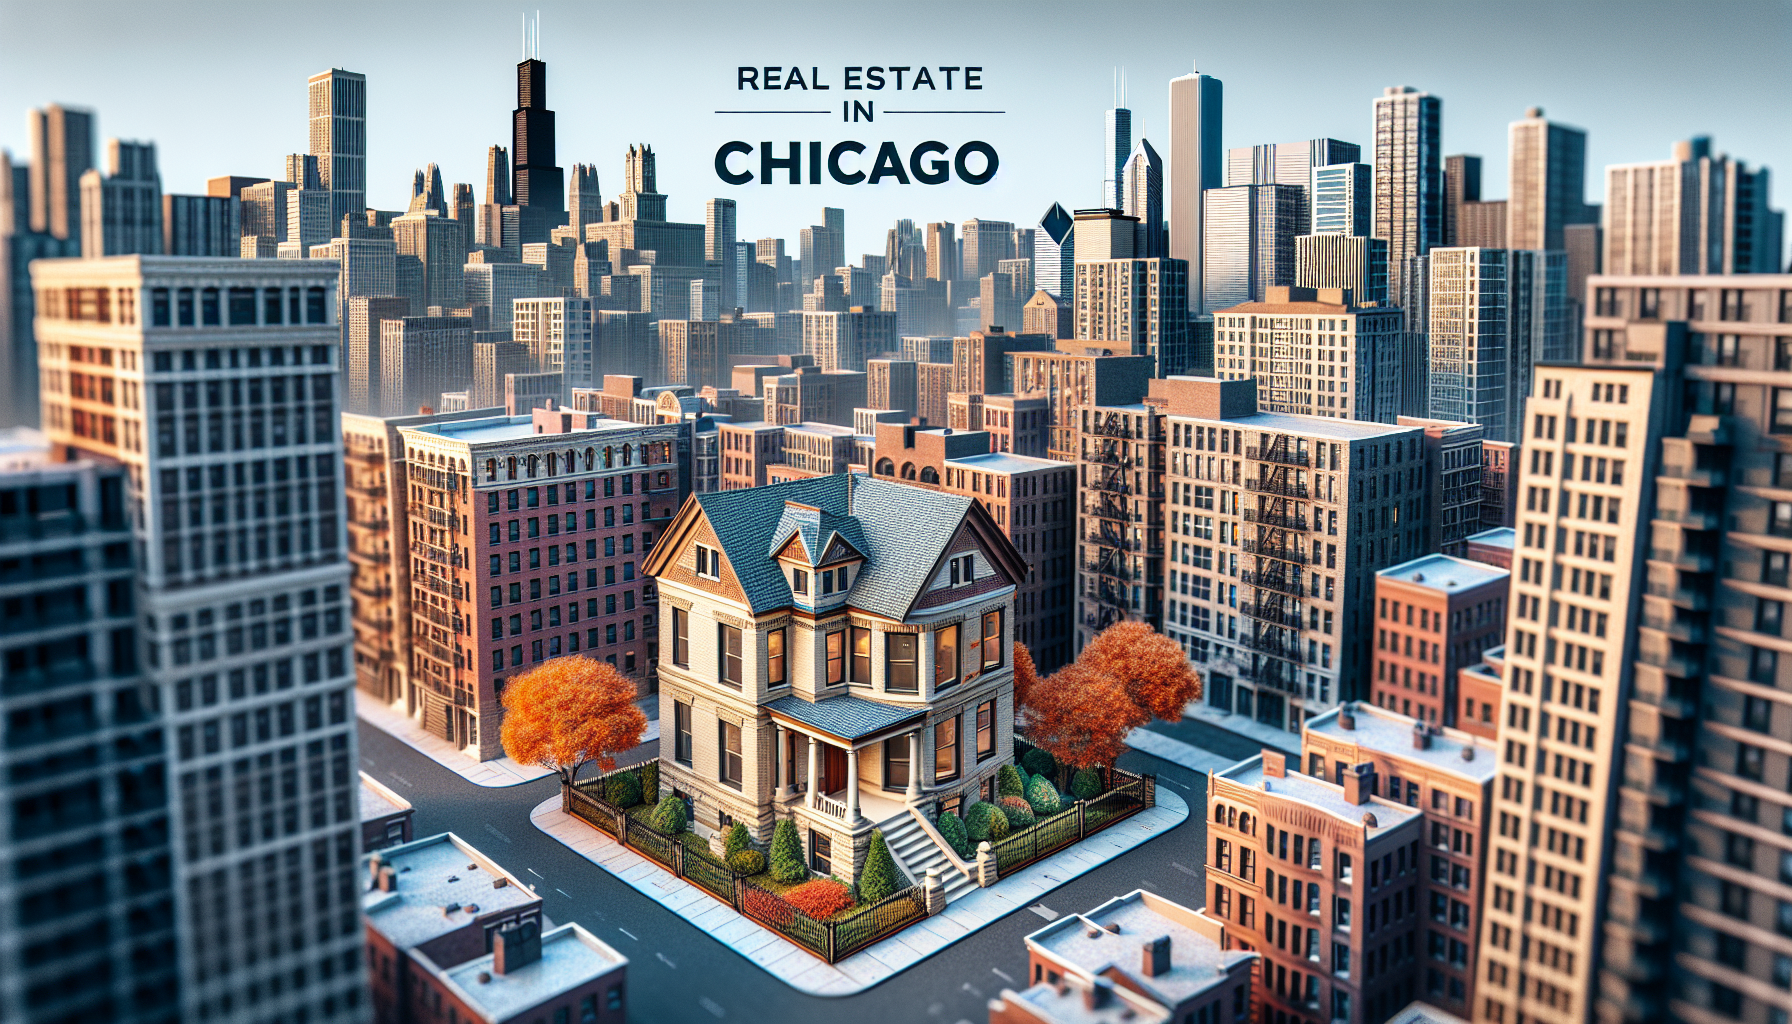 How Much Is The Average Property In Chicago?